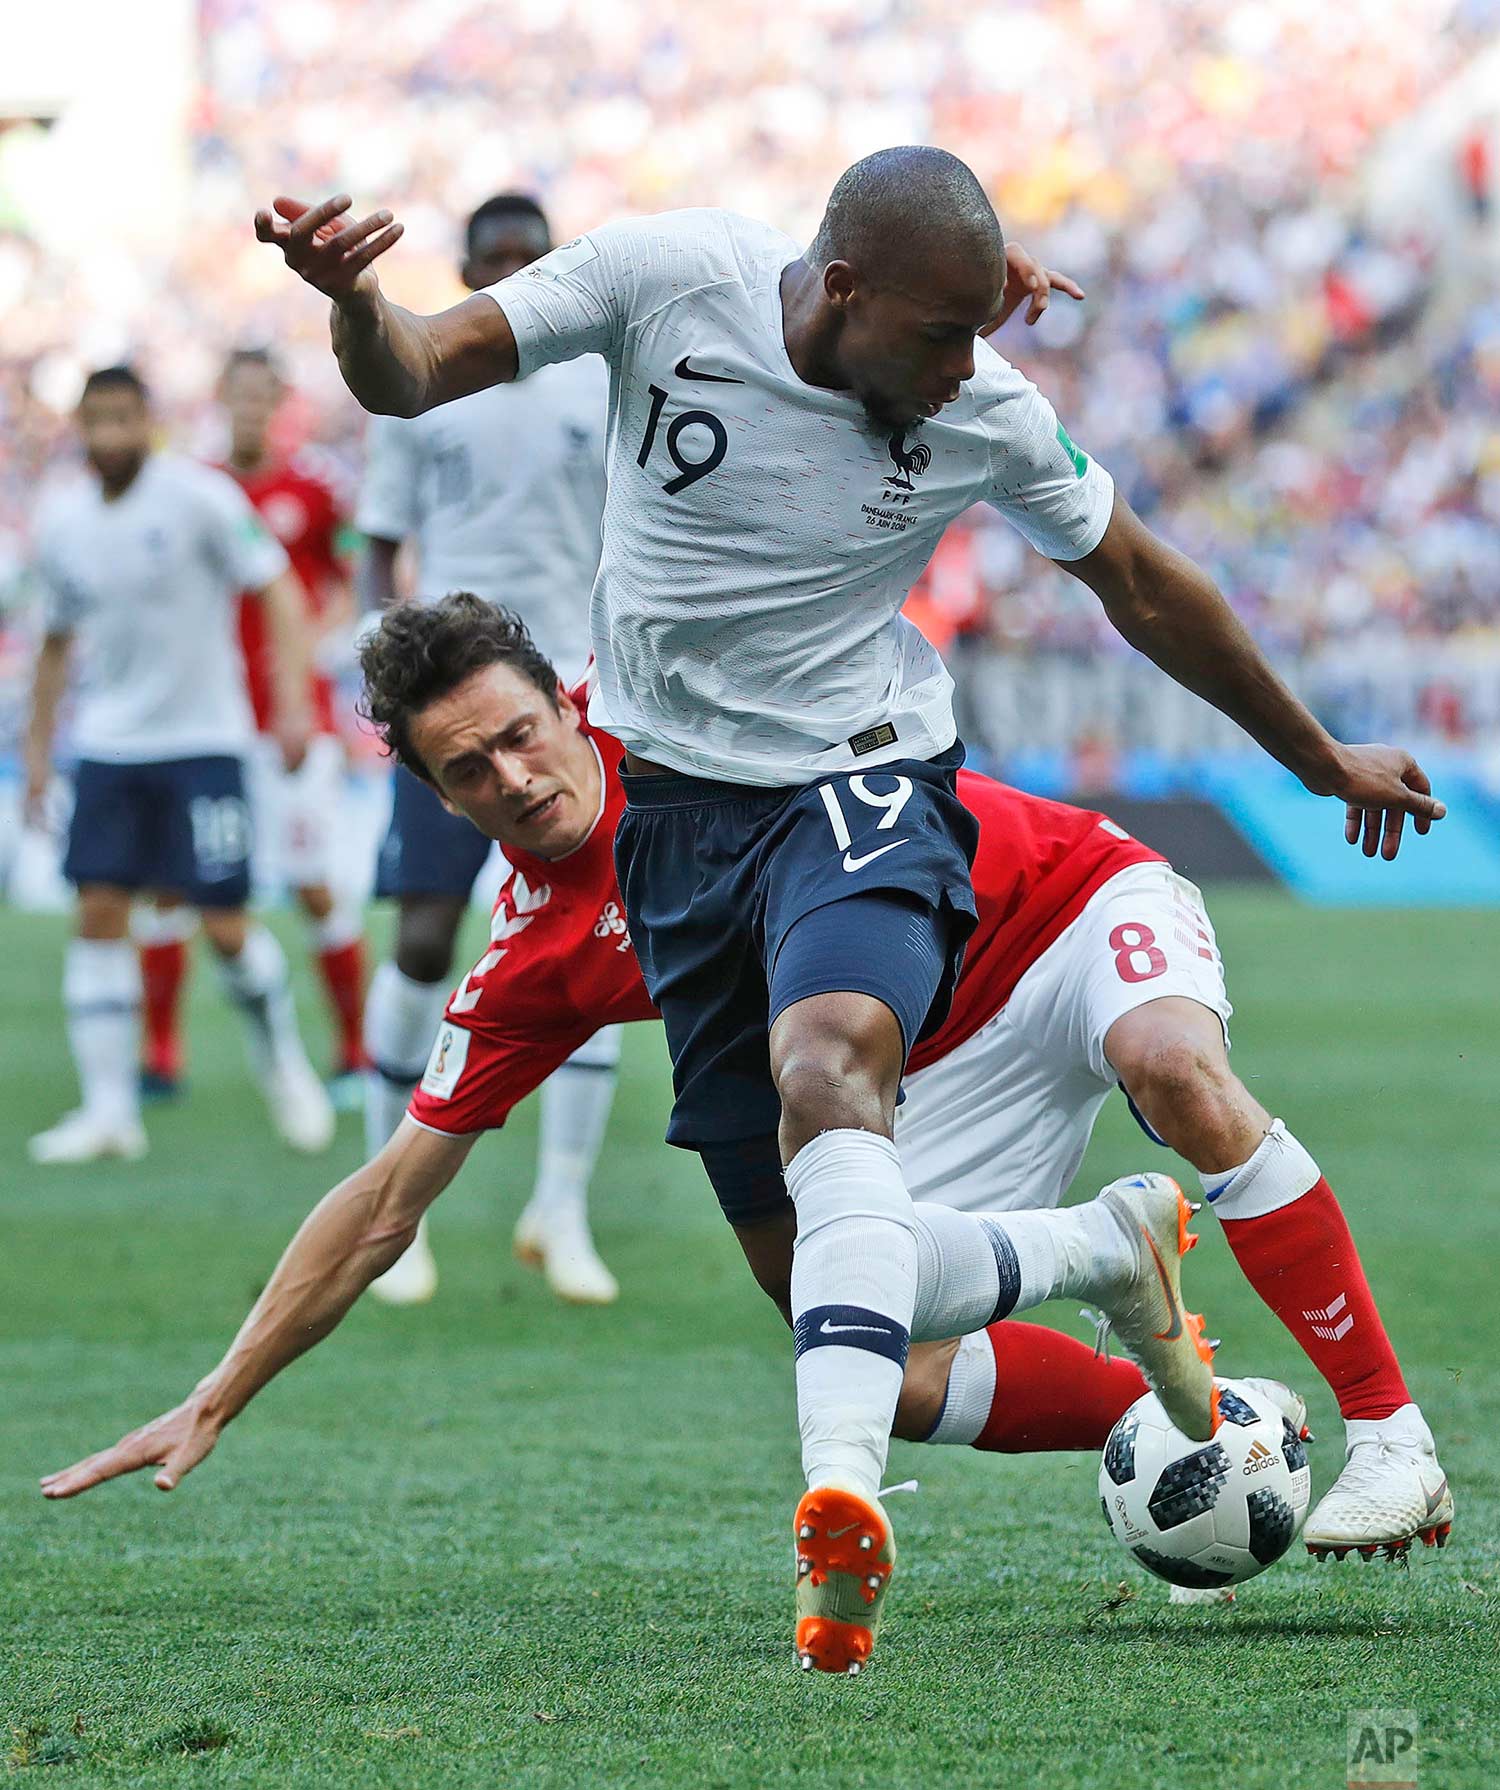  France's Djibril Sidibe, front, and Denmark's Thomas Delaney challenge for the ball during the group C match between Denmark and France at the 2018 soccer World Cup at the Luzhniki Stadium in Moscow, Russia, Tuesday, June 26, 2018. (AP Photo/David V